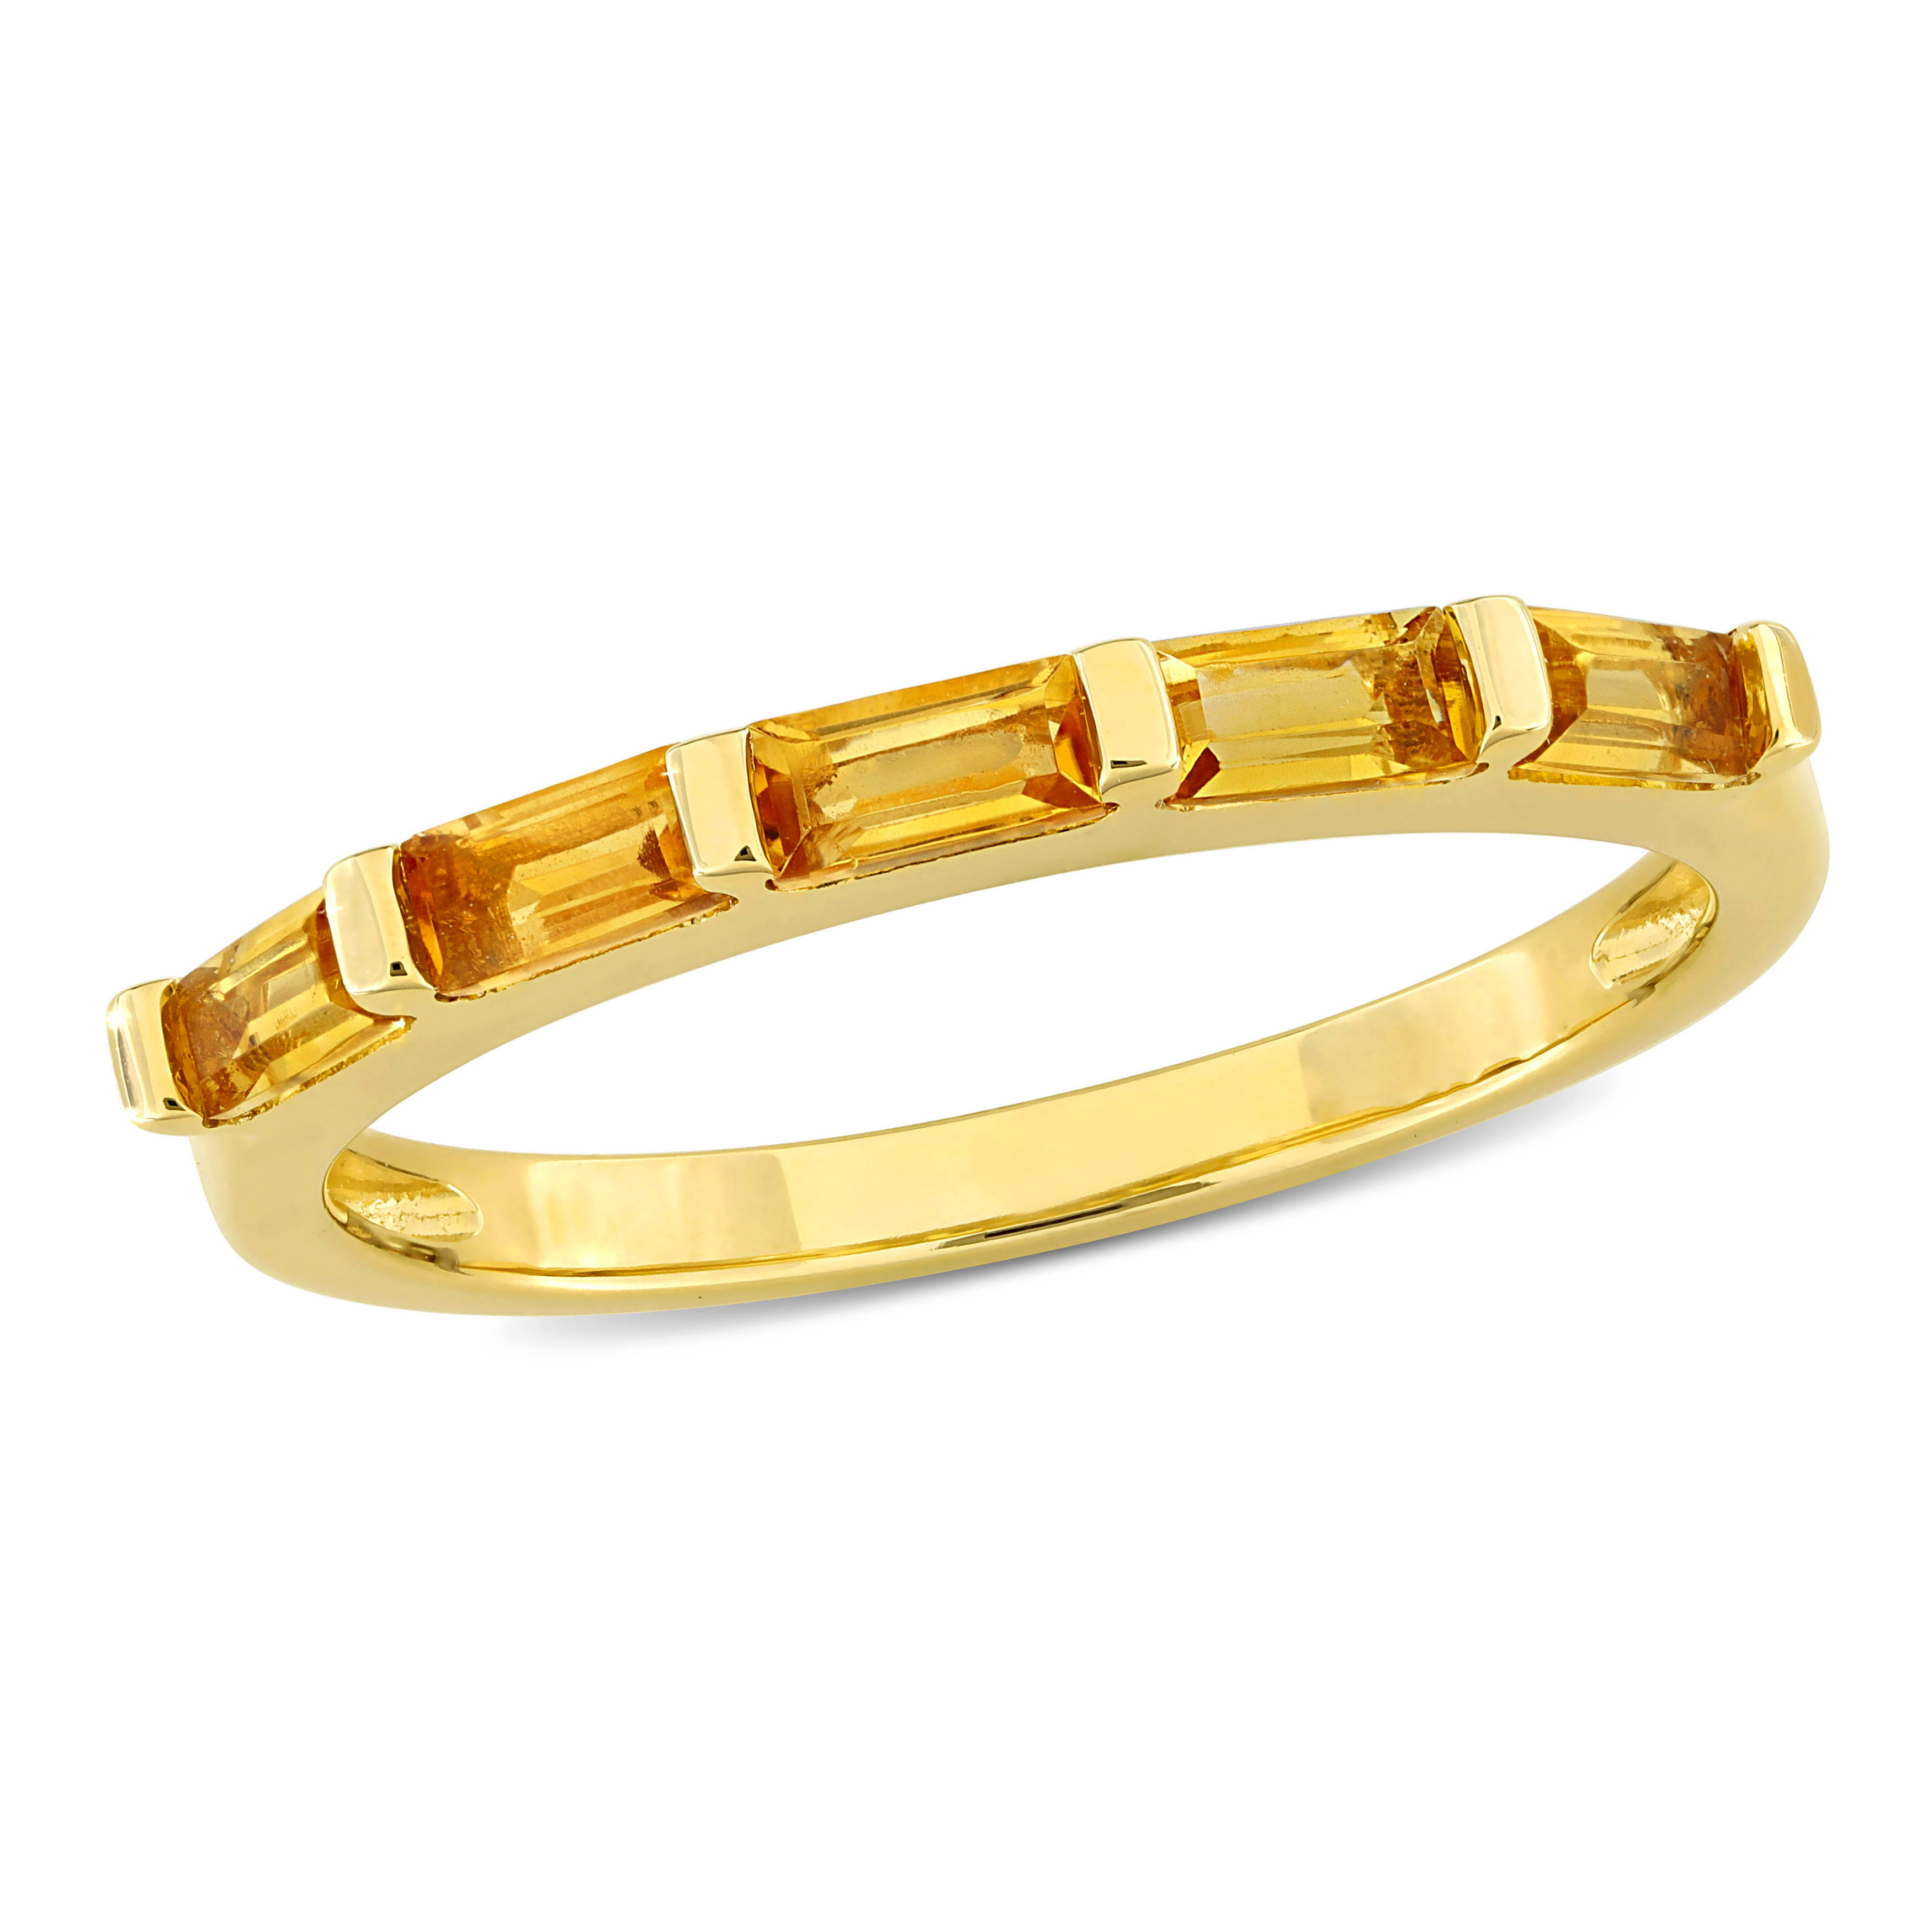 5/8 CT TGW Baguette-Cut Citrine Anniversary Band Ring in 10k Yellow Gold